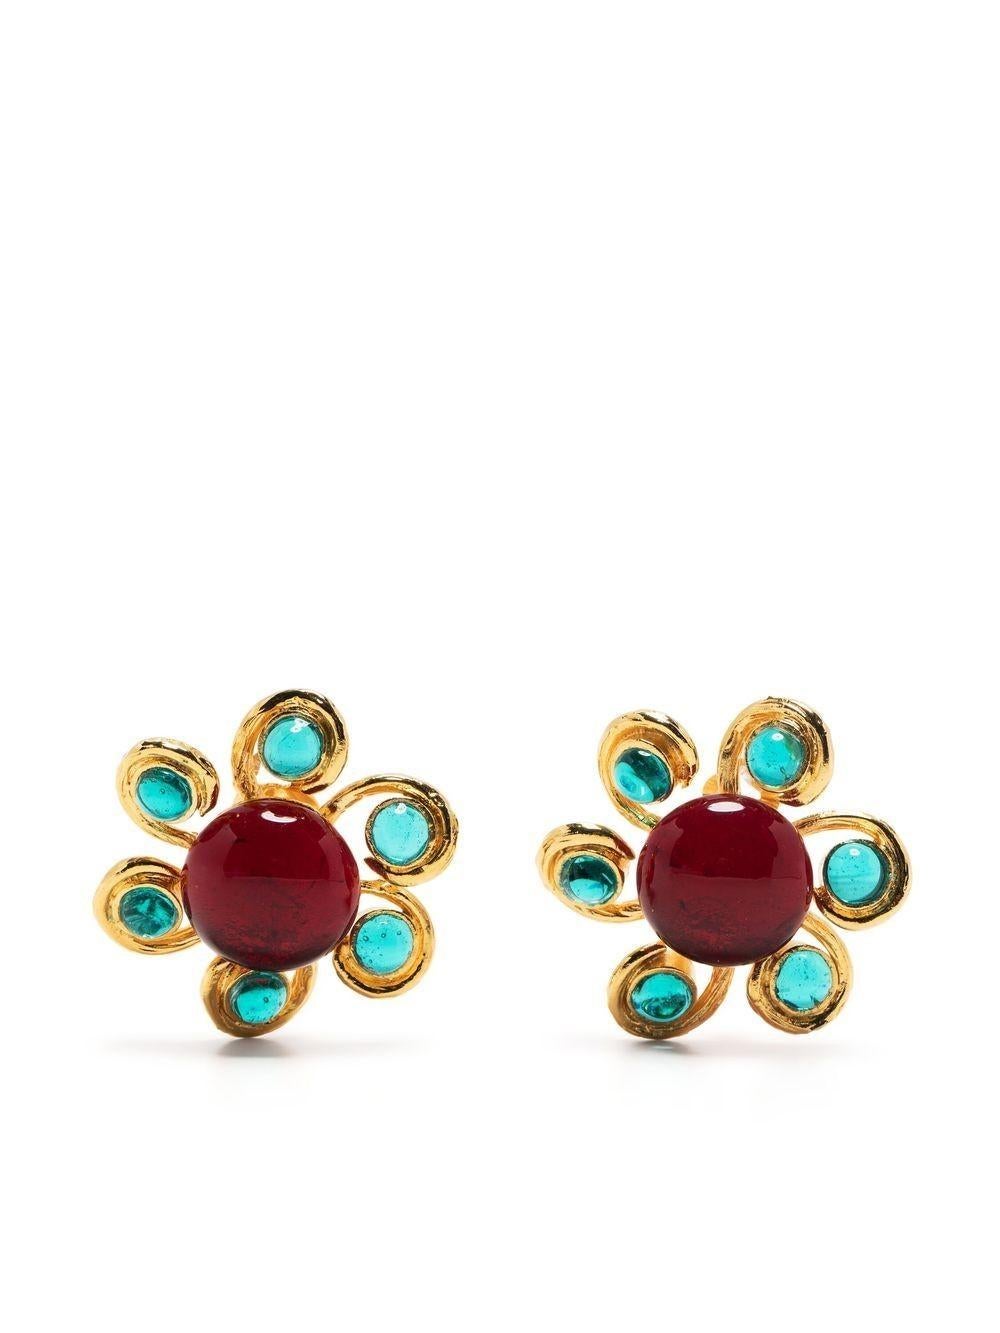 Working alongside Paris' famed jeweller specialising in glass beading, Gripoix Paris, Chanel presents these gold-plated clip-on earrings. Constructed in a delicate floral-shaped silhouette, the pair are adorned with aqua blue and red-toned glass